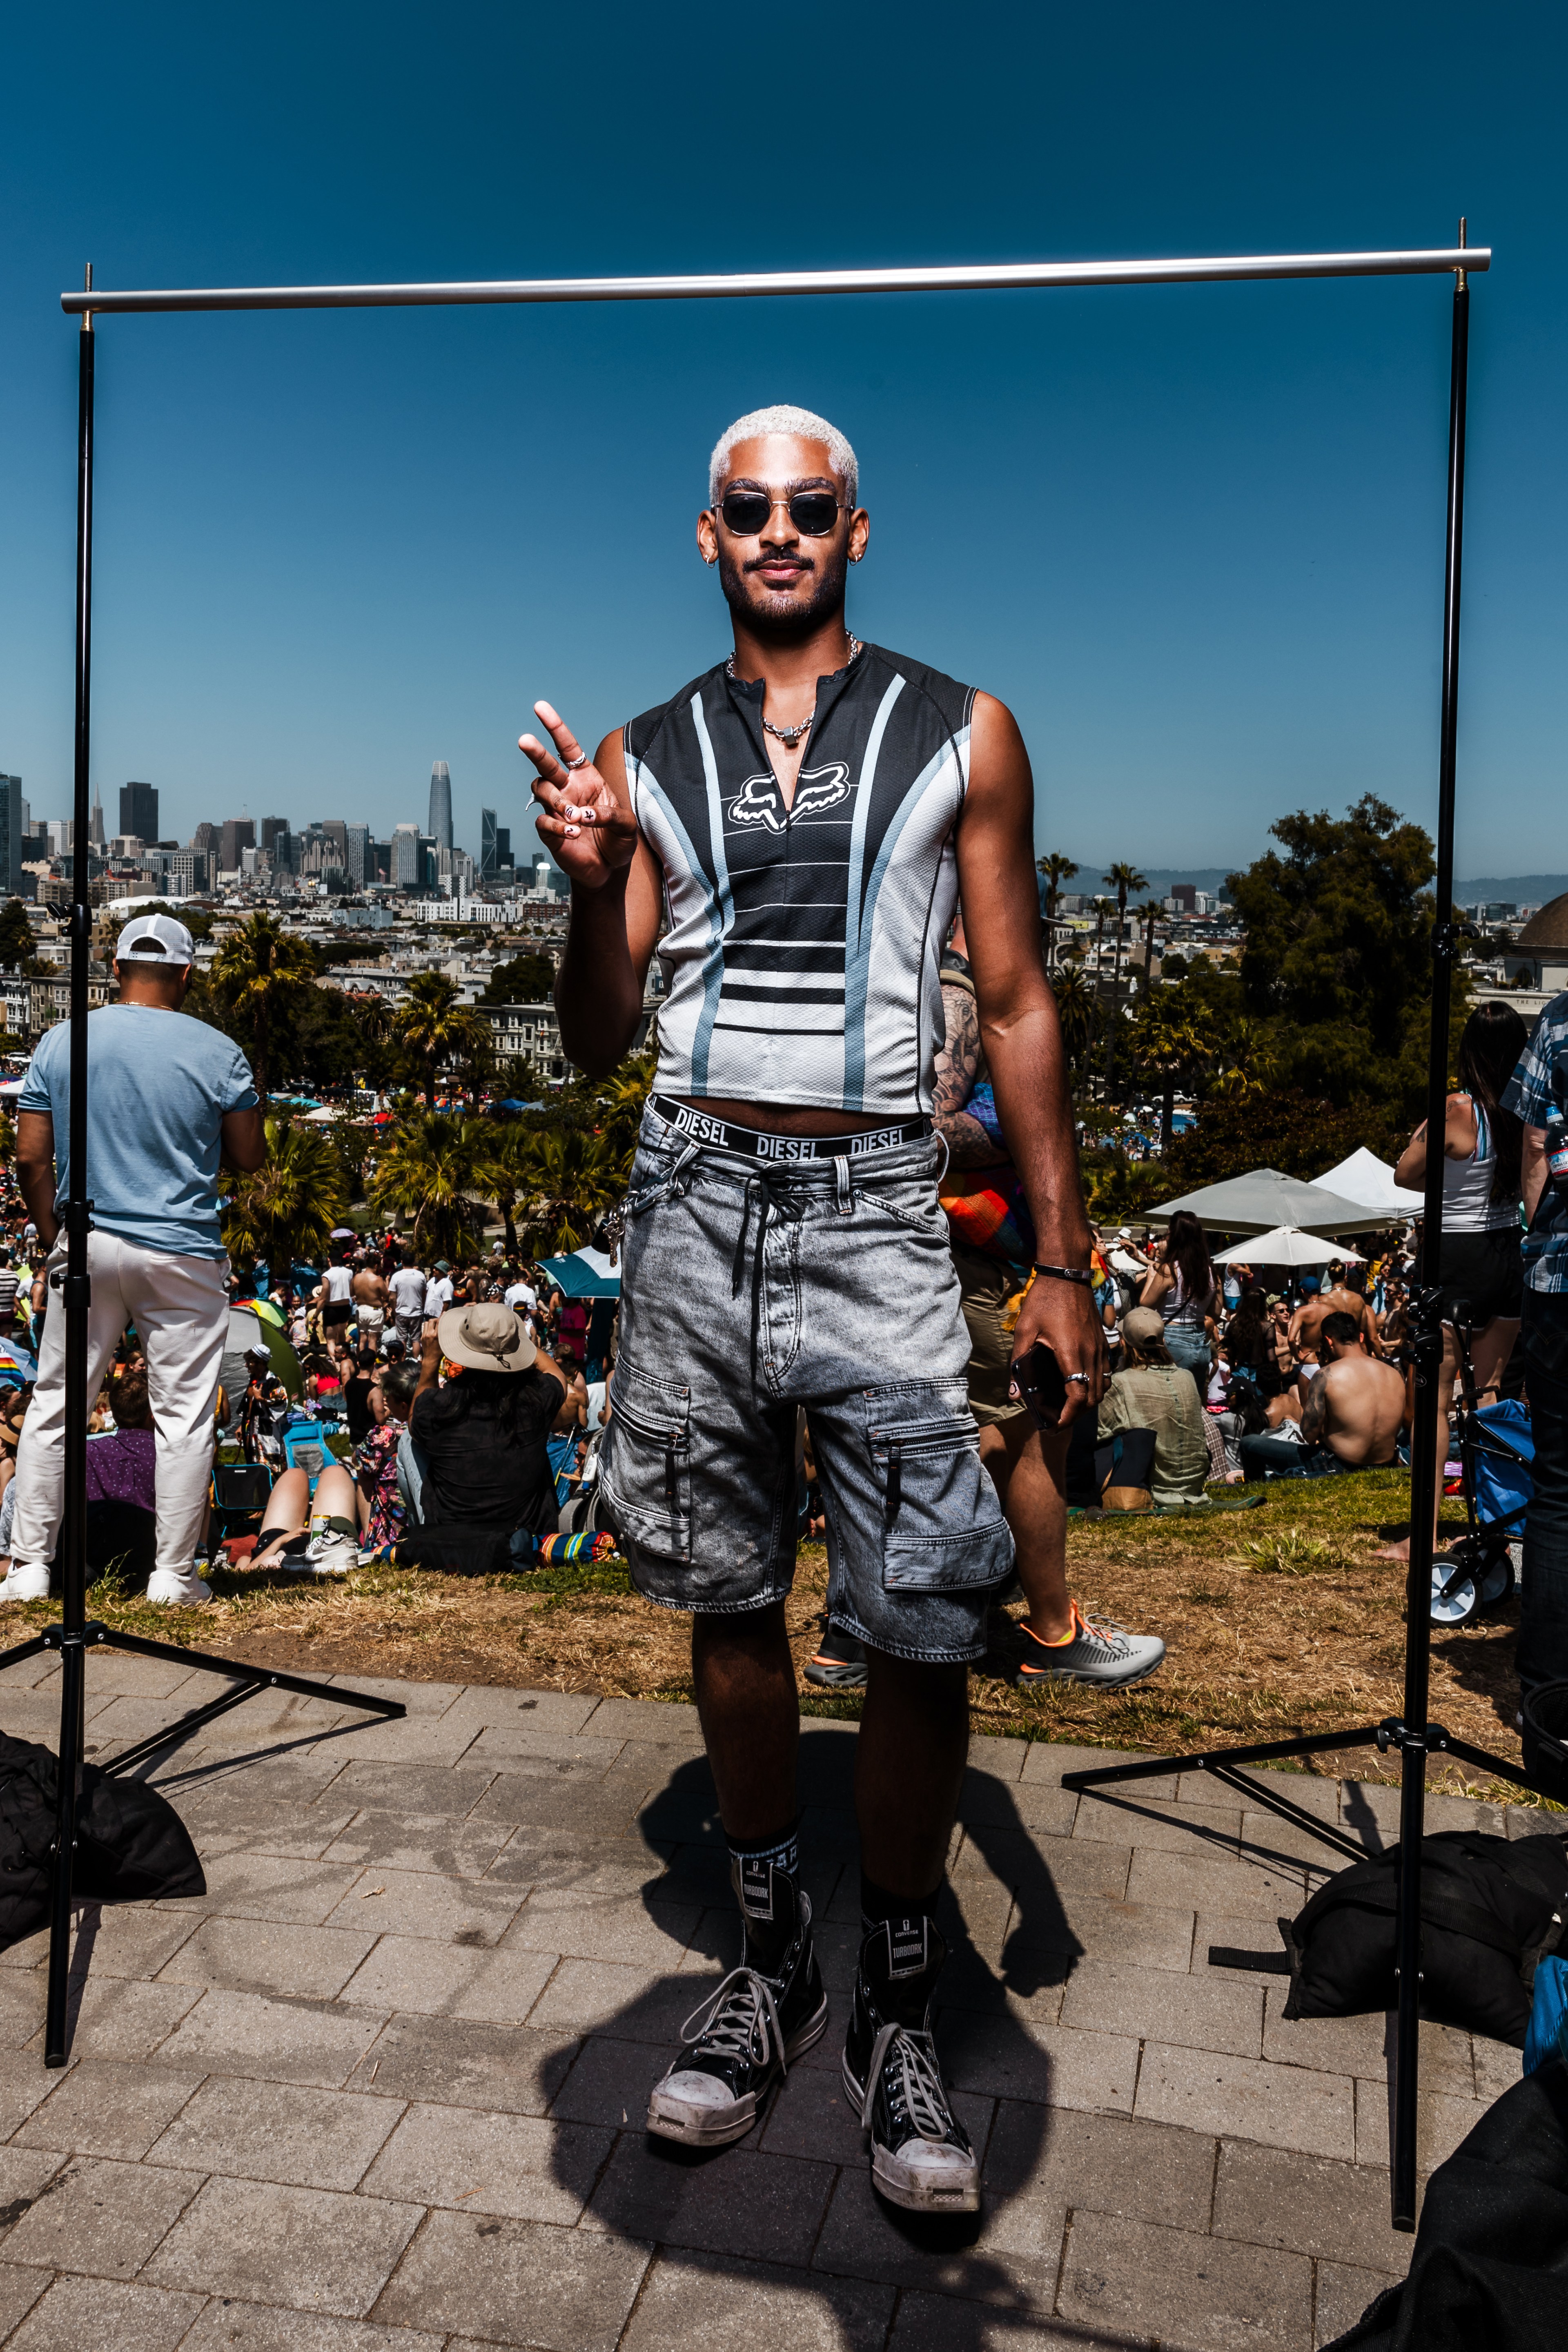 A person stands outdoors in front of a crowd, making a peace sign. They wear sunglasses, a sleeveless top, cargo shorts, and high-top sneakers, with a city skyline behind them.